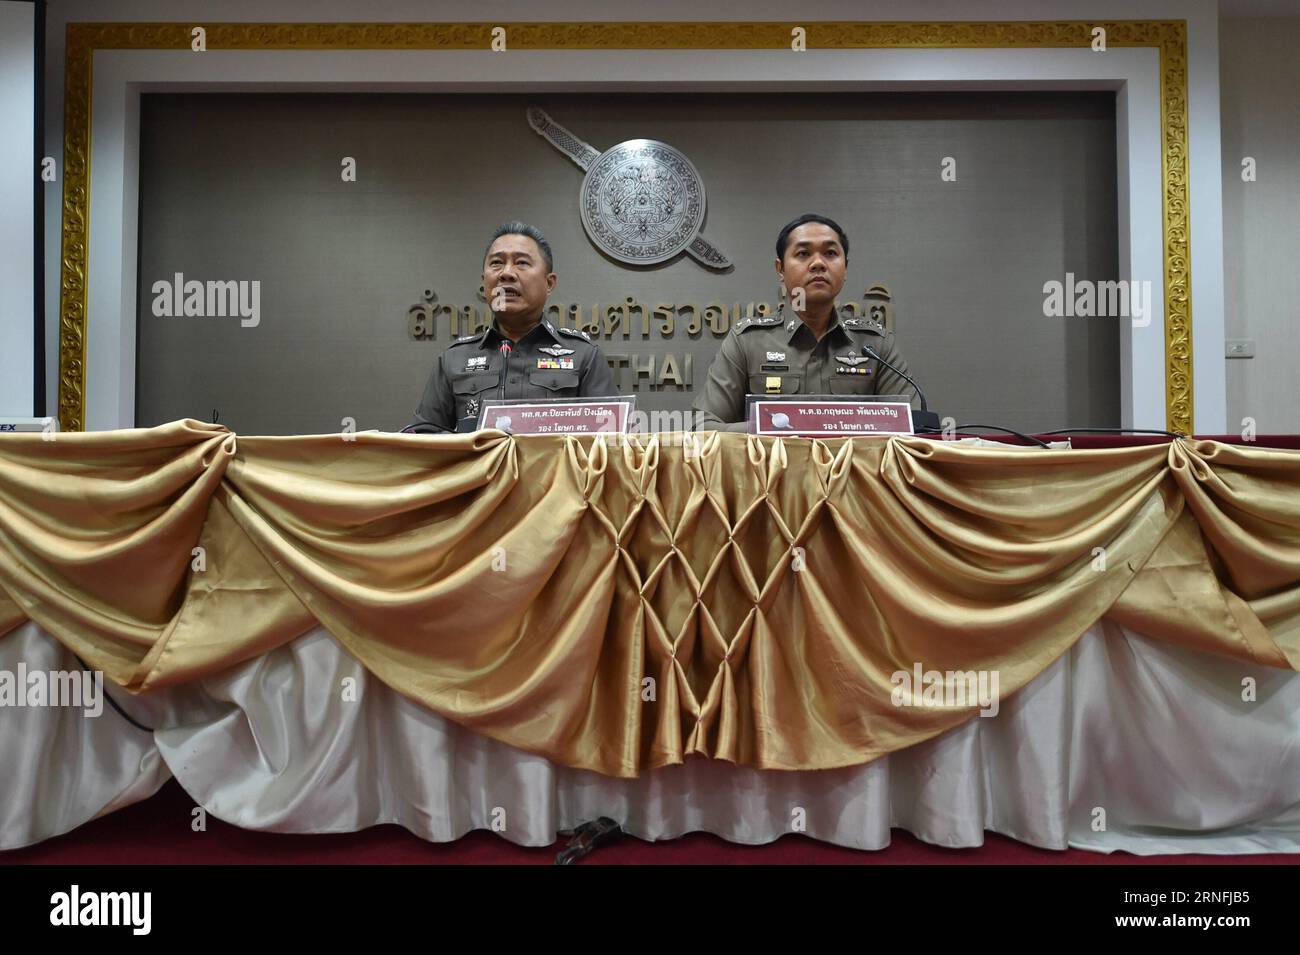 Anschlagsserie in Thailand: PK der Polizei (160812) -- BANGKOK, Aug. 12, 2016 -- Thai police deputy spokesmen Piyapan Pingmuang (L) and Krisana Patanacharoen attend a press conference in Bangkok, Thailand, on Aug. 12, 2016. A series of bomb blasts rocked Thailand s southern provinces, many famous among tourists, on Friday, Thai Queen Sirikit s 84th birthday or the Mother s Day, after two bombs exploded in Hua Hin late Thursday. ) (zy) THAILAND-BANGKOK-BOMB EXPLOSIONS-PRESS CONFERENCE LixMangmang PUBLICATIONxNOTxINxCHN   Series of attacks in Thai country press conference the Police 160812 Bangk Stock Photo